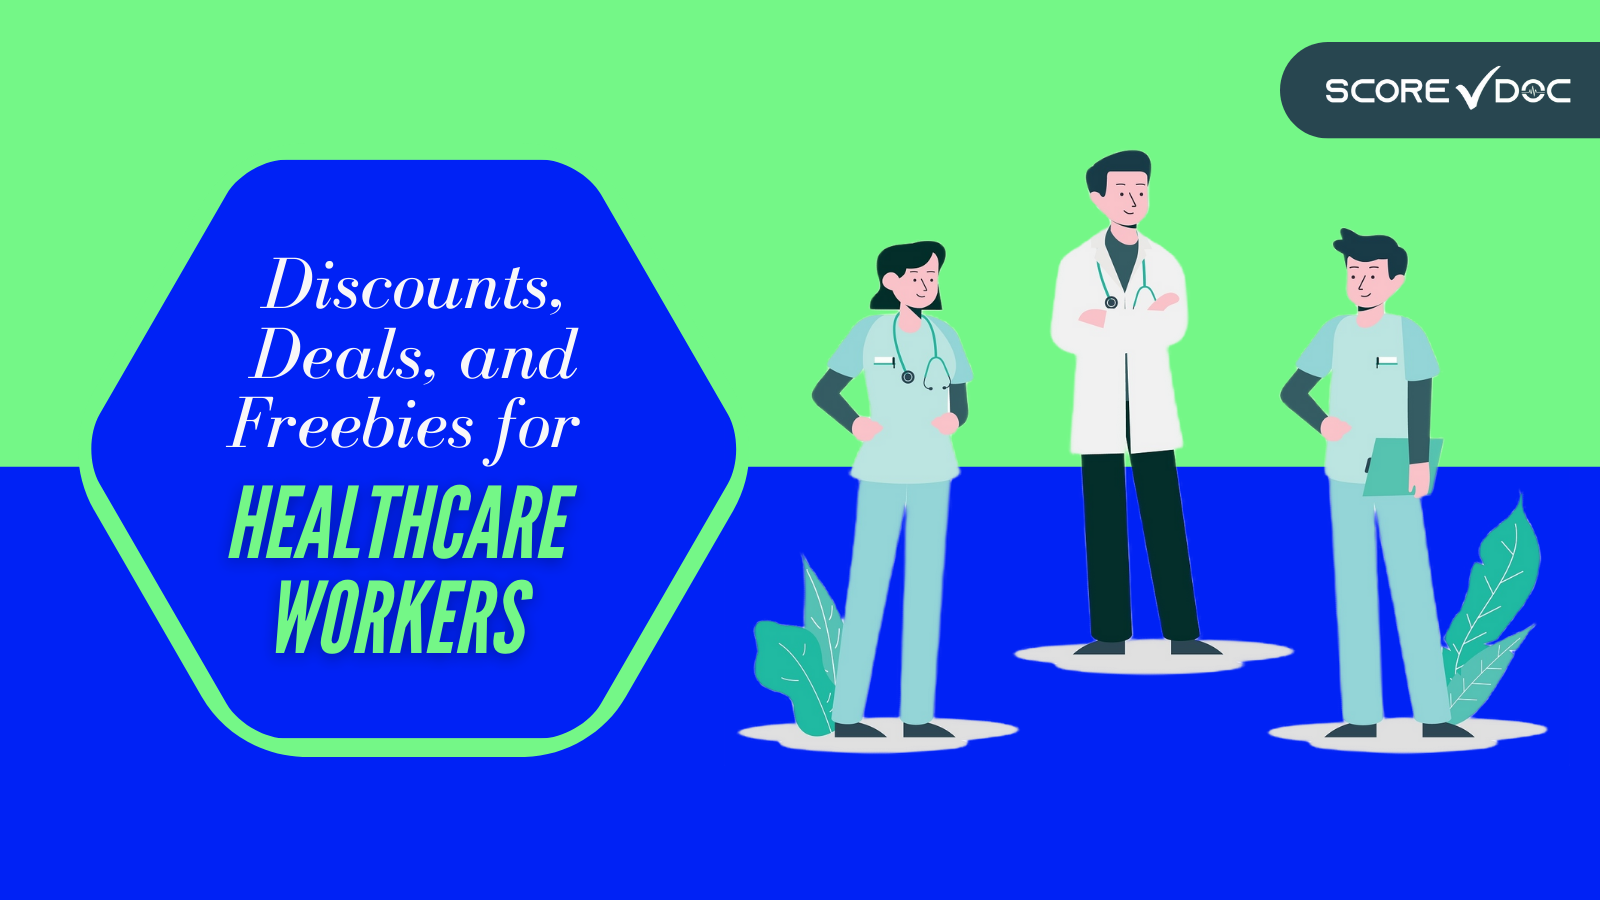 Discounts, Deals, and Freebies for Healthcare Workers